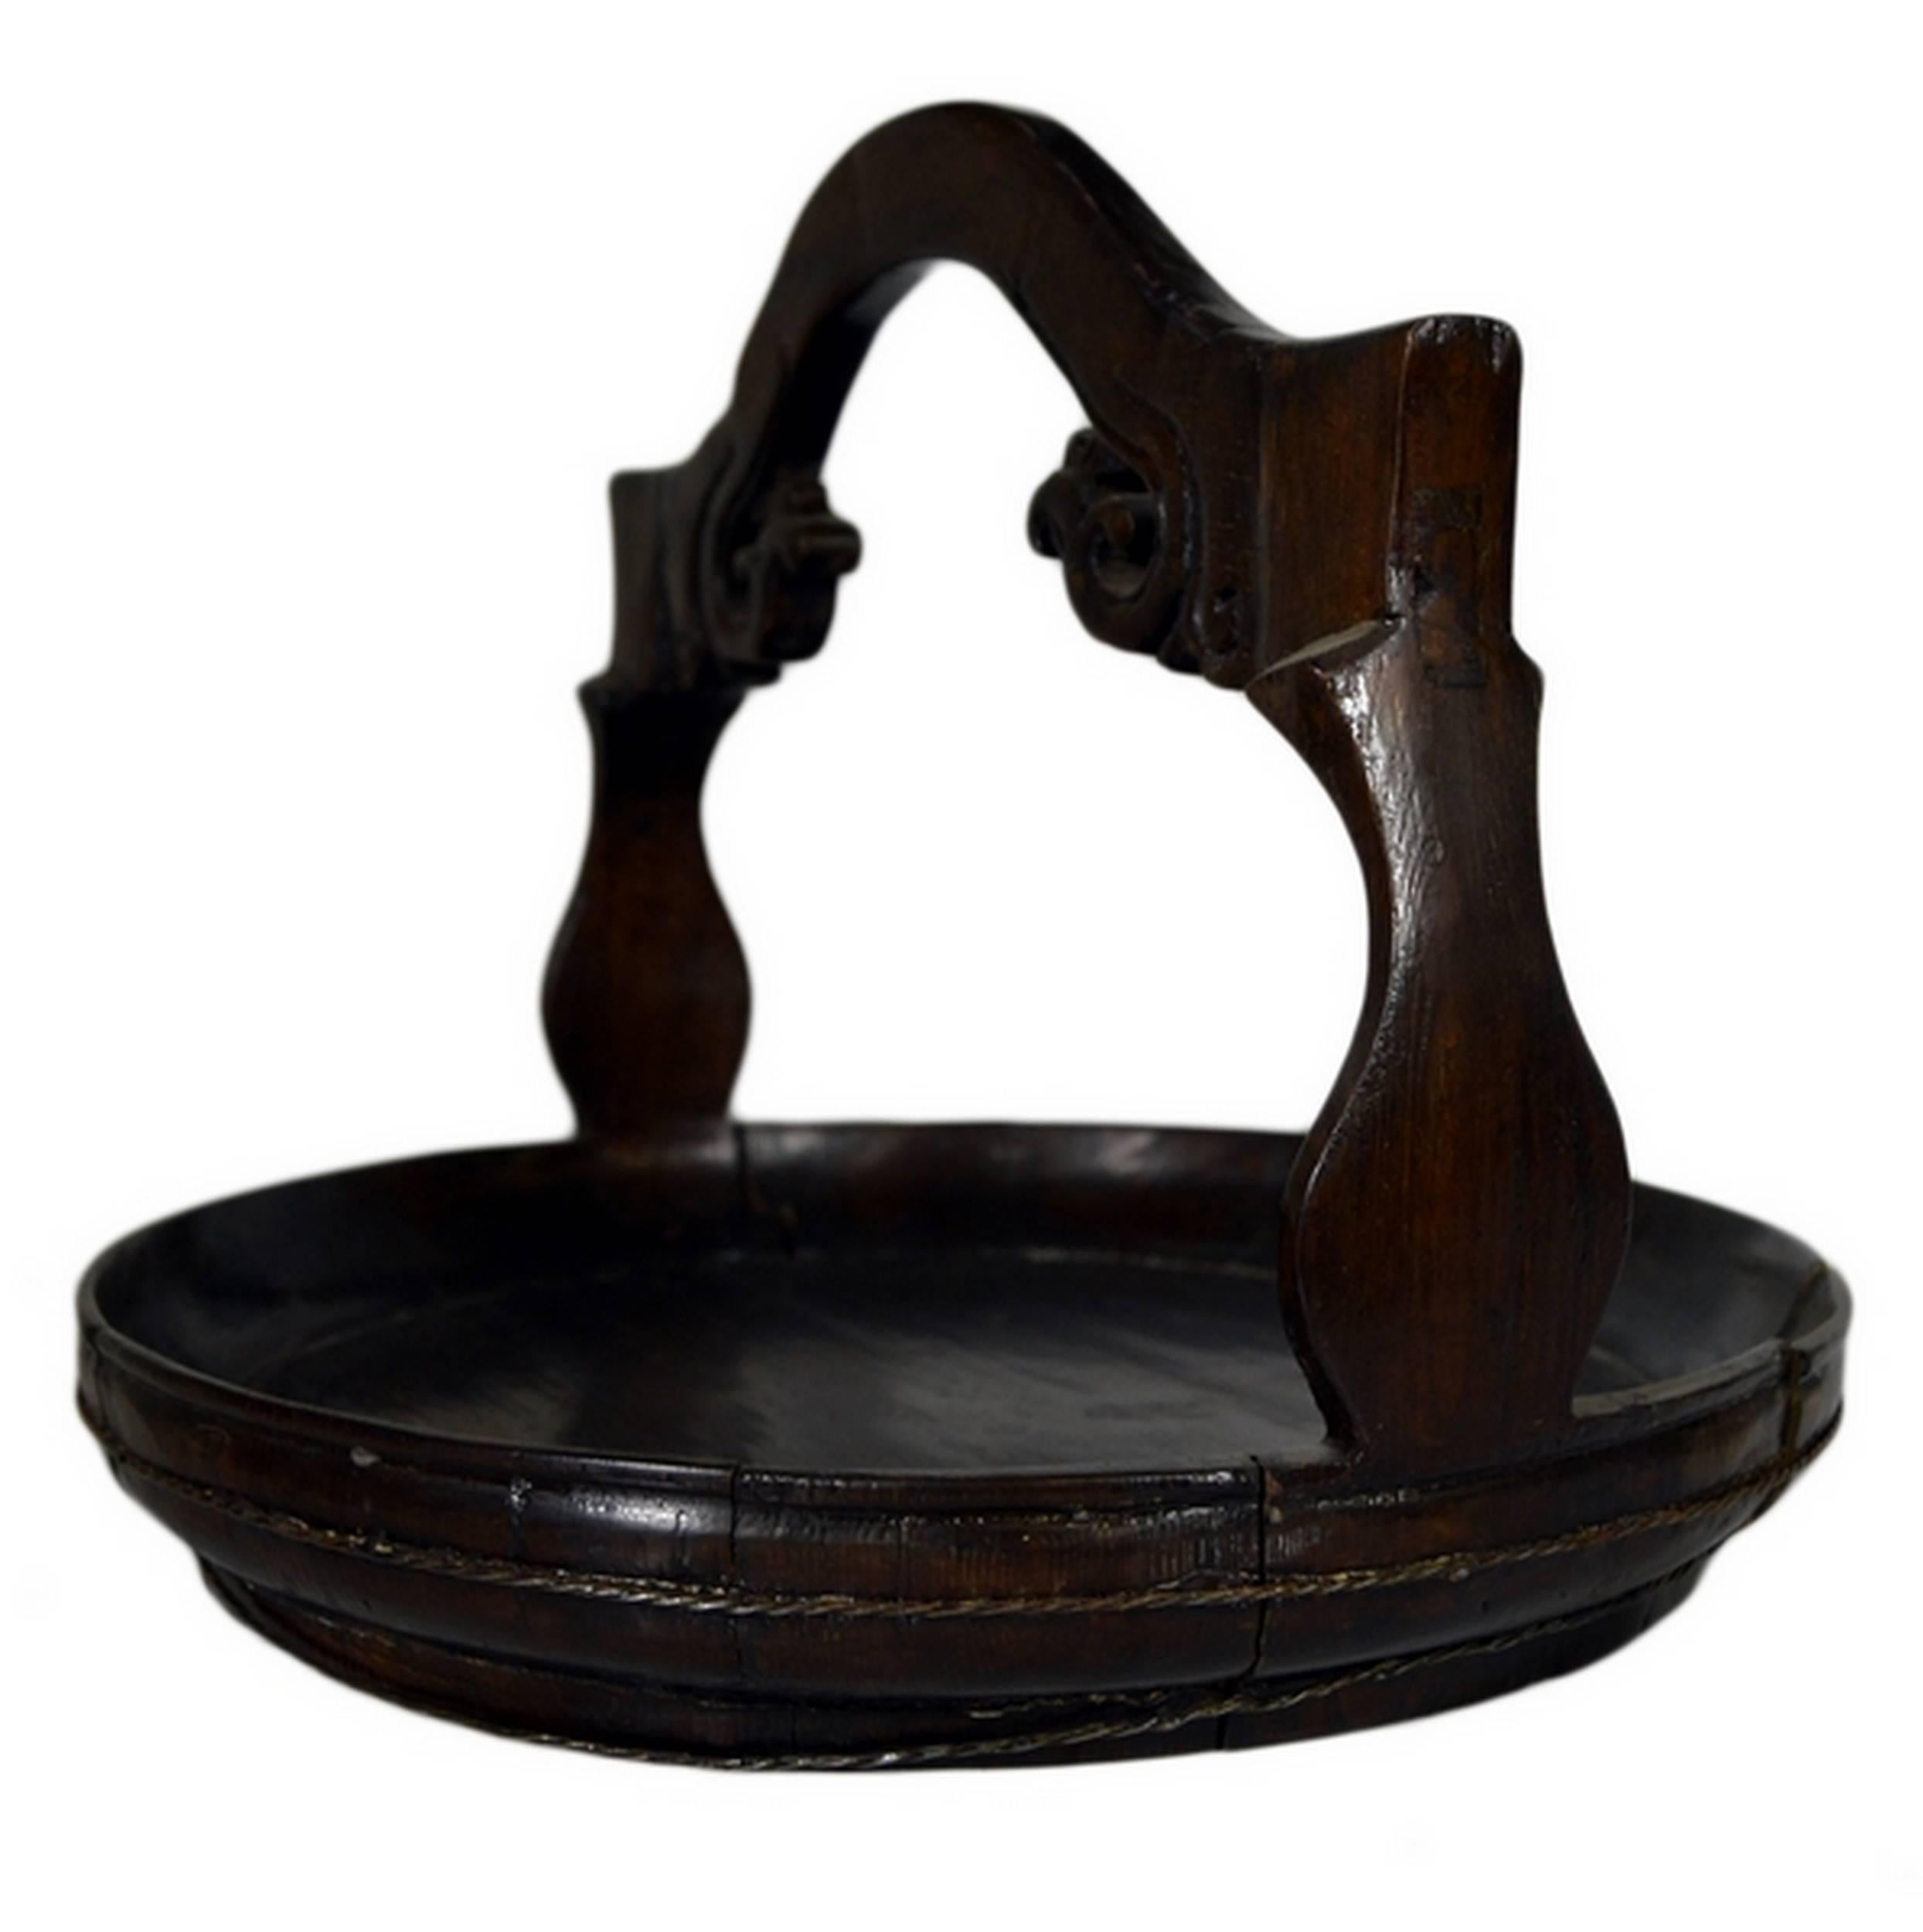 A 19th century Chinese offering basket hand-carved in dark wood. This refined basket features a circular flat base with a small raised edge, and a squat carved handle. The handle displays carved scroll details evoking foliage while two thin cords